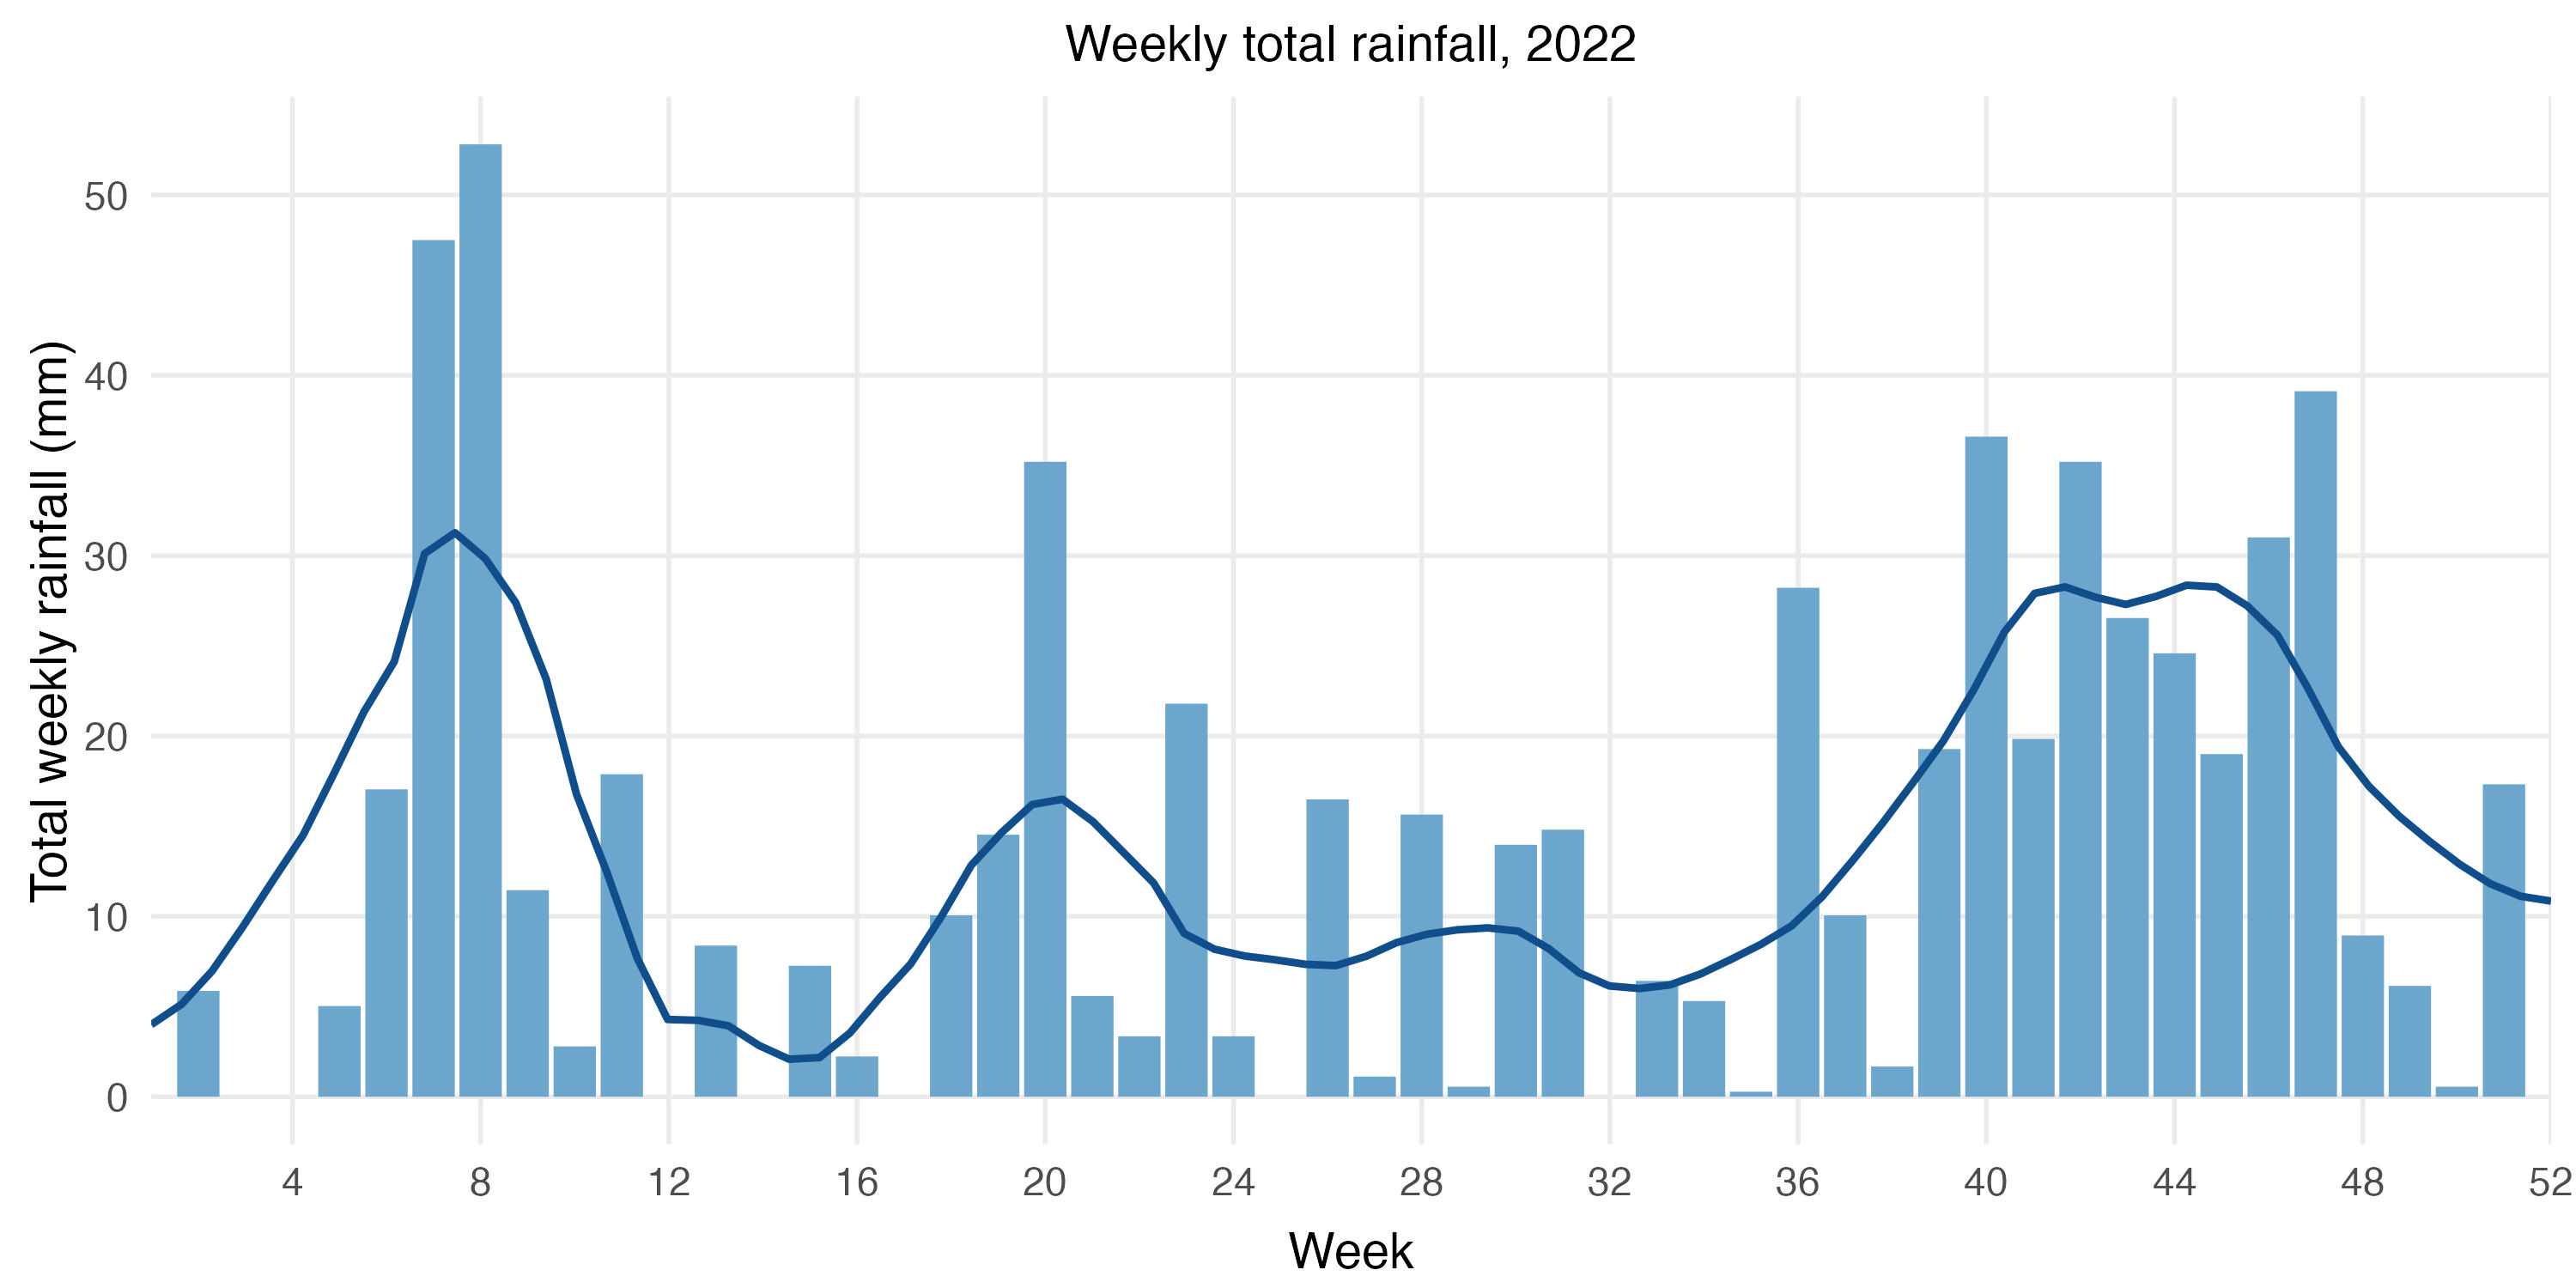 Plot of the weekly rainfall totals and trend